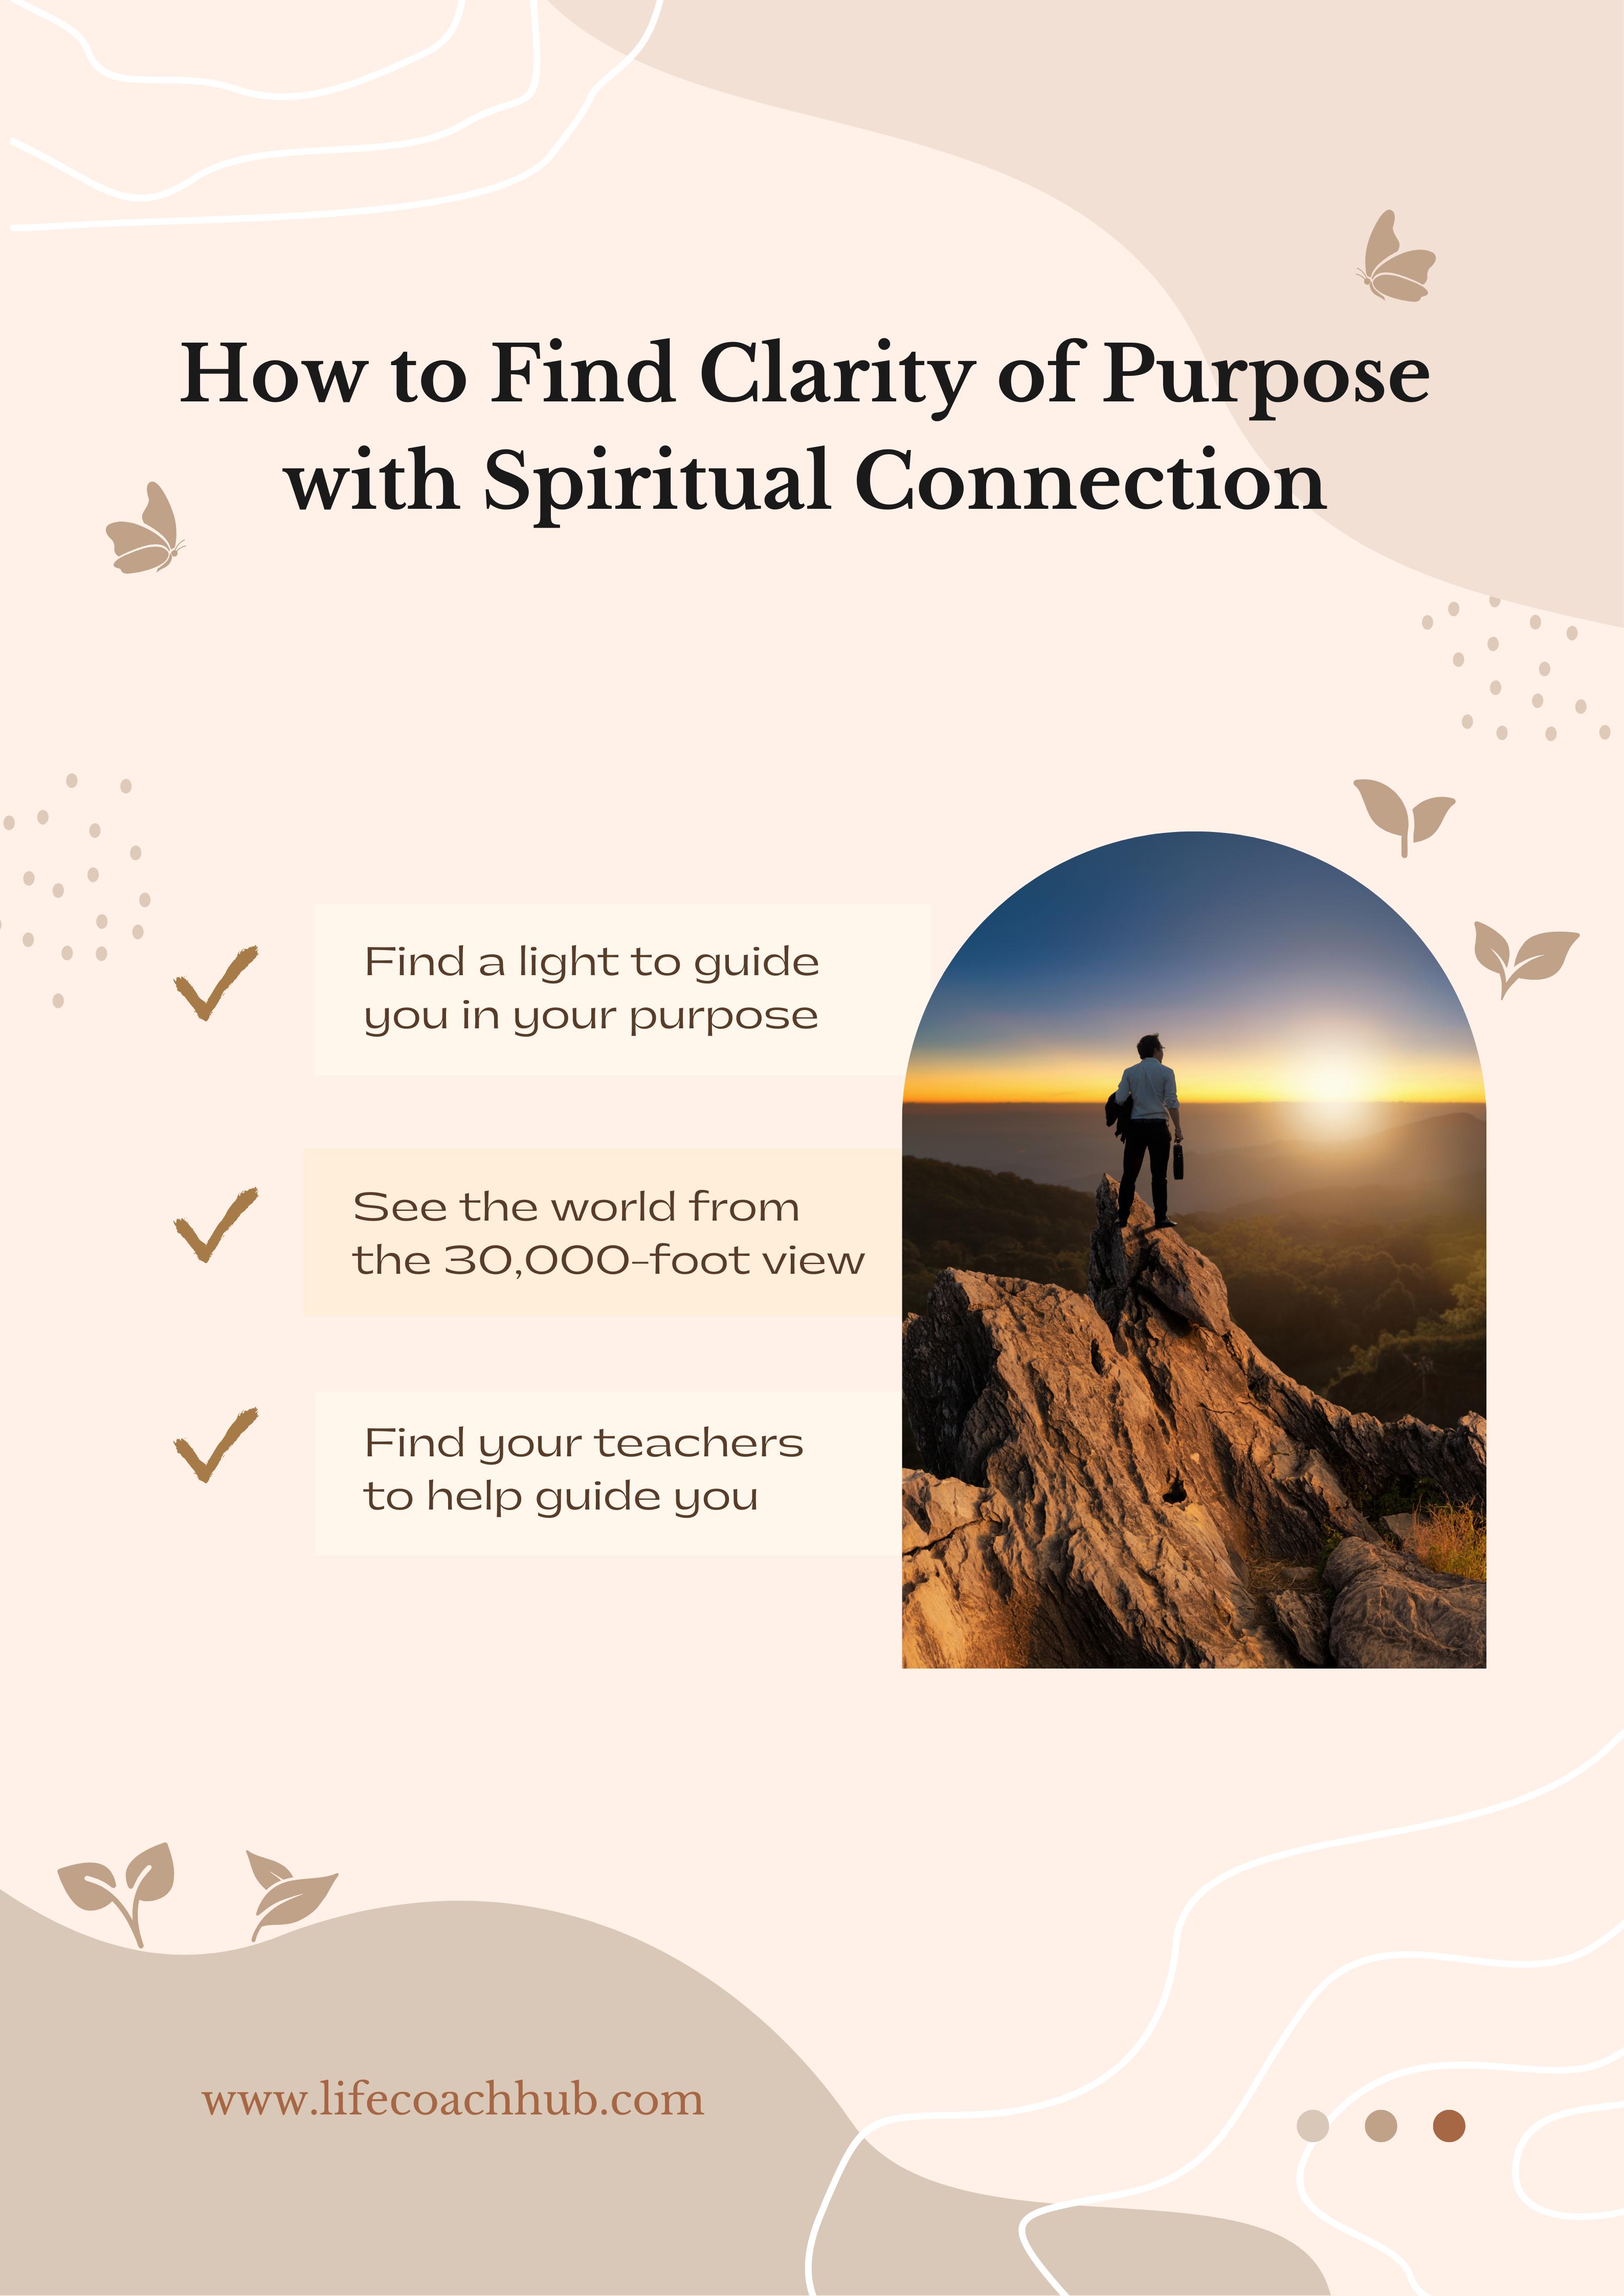 How to find clarity of purpose with spiritual connection